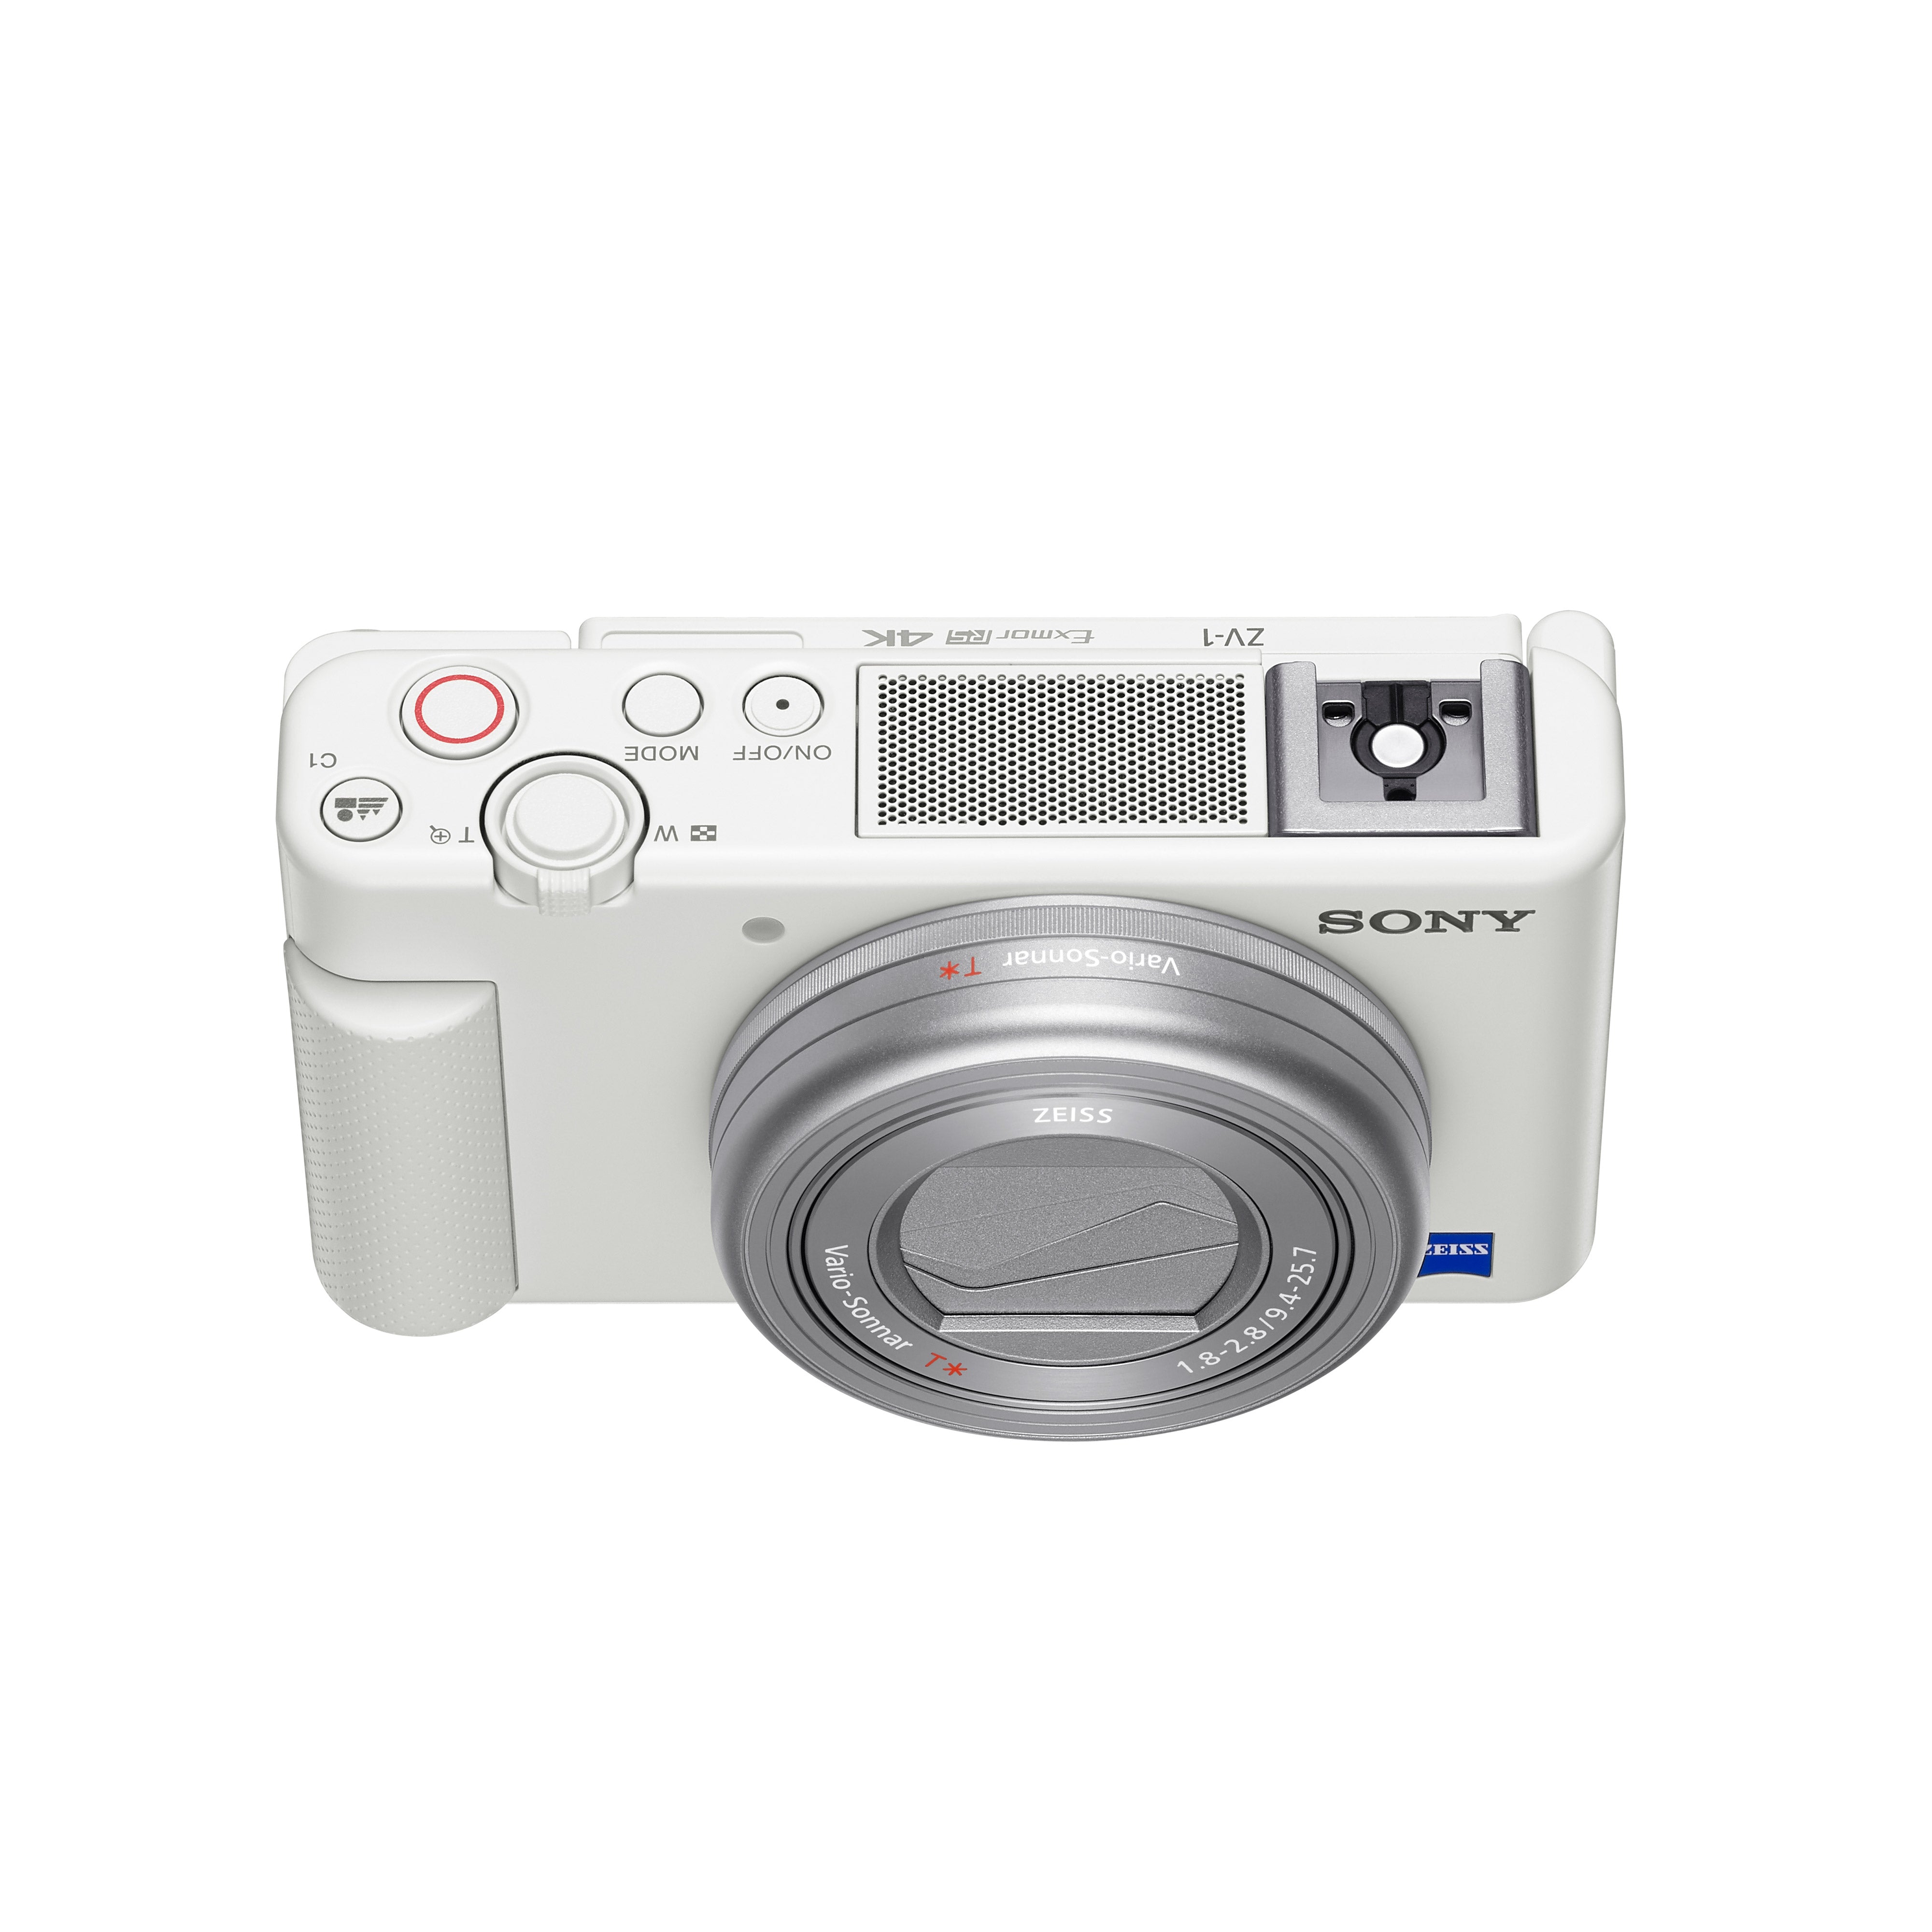 Sony ZV-1 Camera for Content Creators and Vloggers (White)